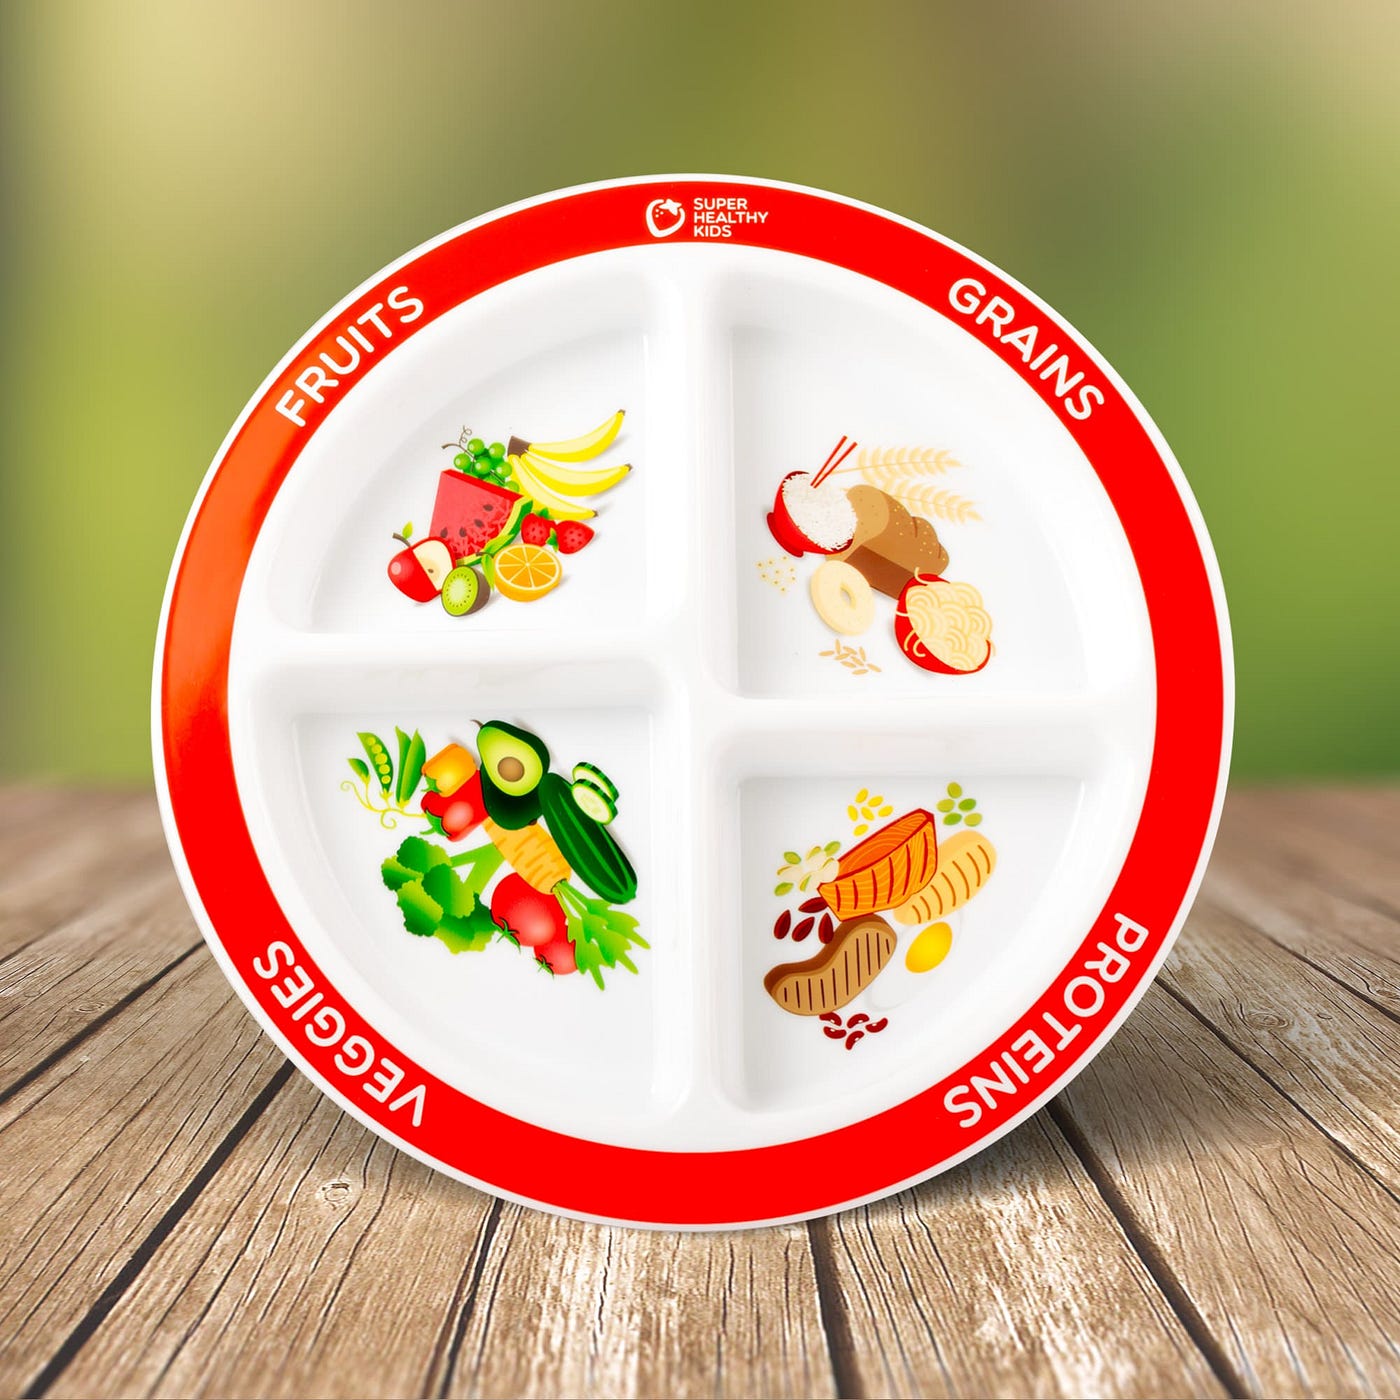 portion control plate<br>portion plate<br>portion food plate<br>food portion plates<br>adult portion plate<br>portion bowls<br>portion size plates<br>portion plates for weight loss<br>plate portion for <a href=